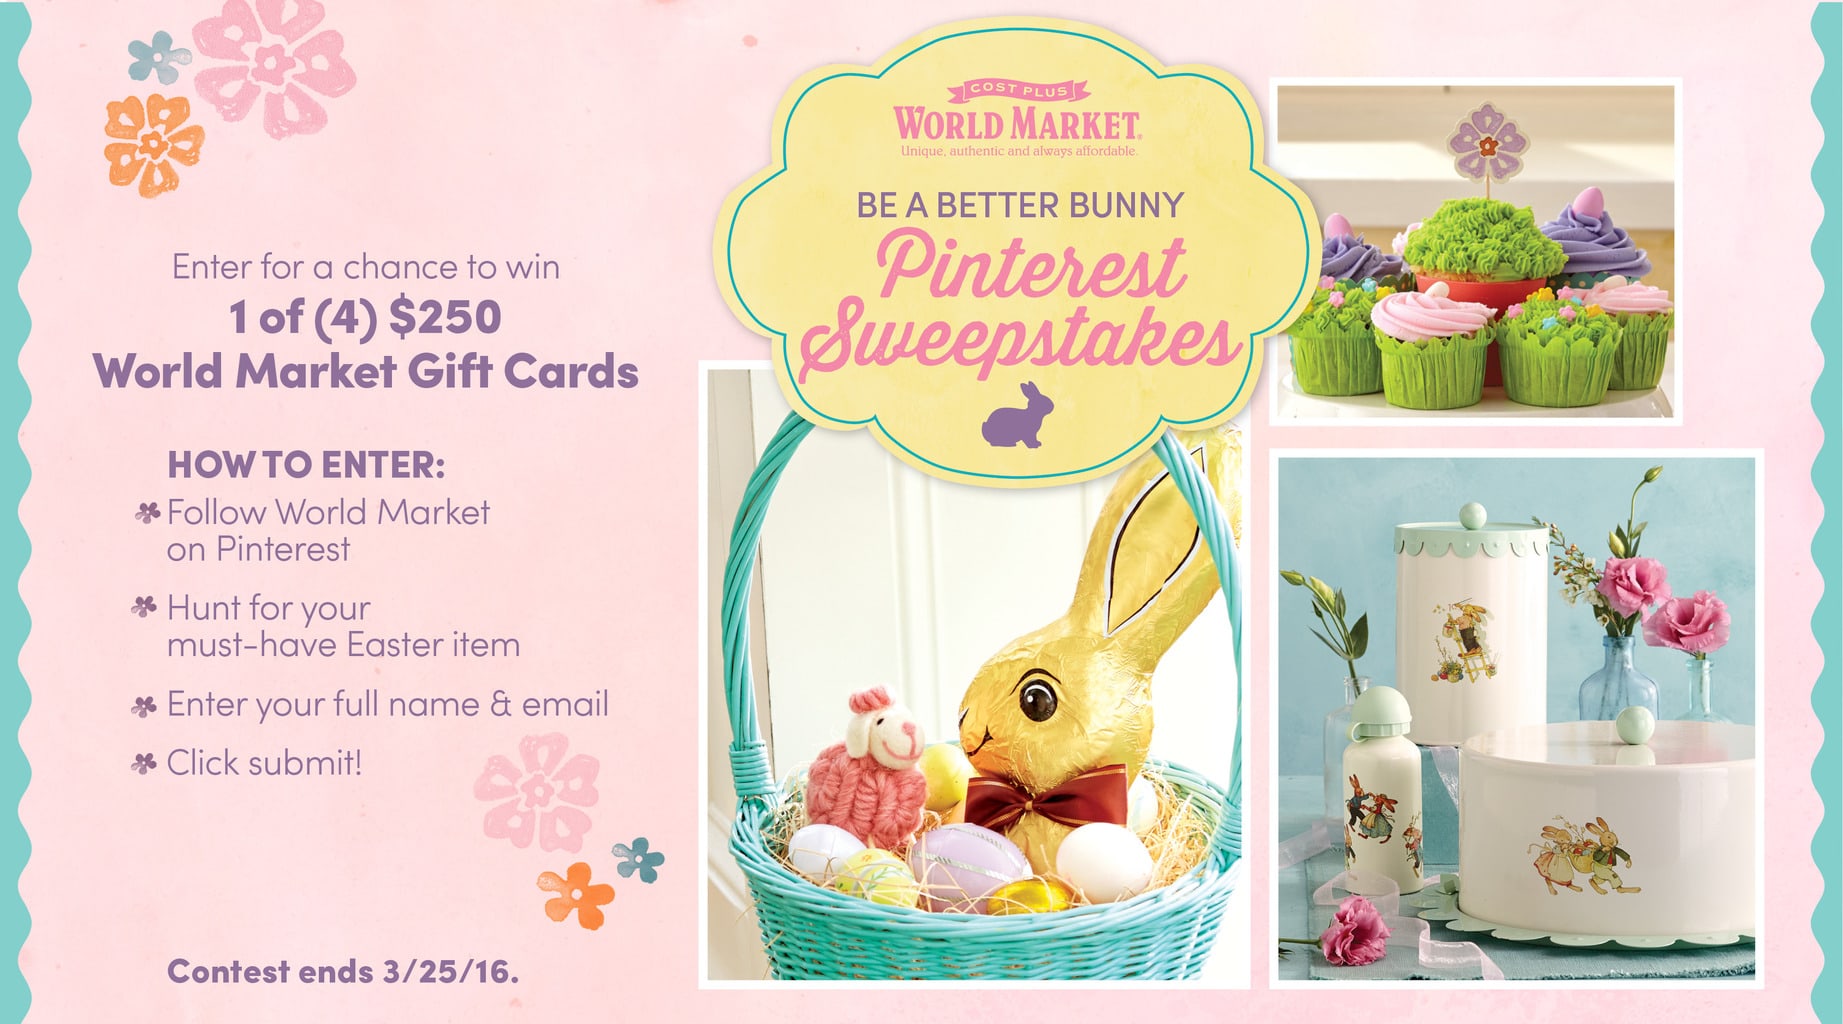 World Market's Be a Better Bunny Sweepstakes